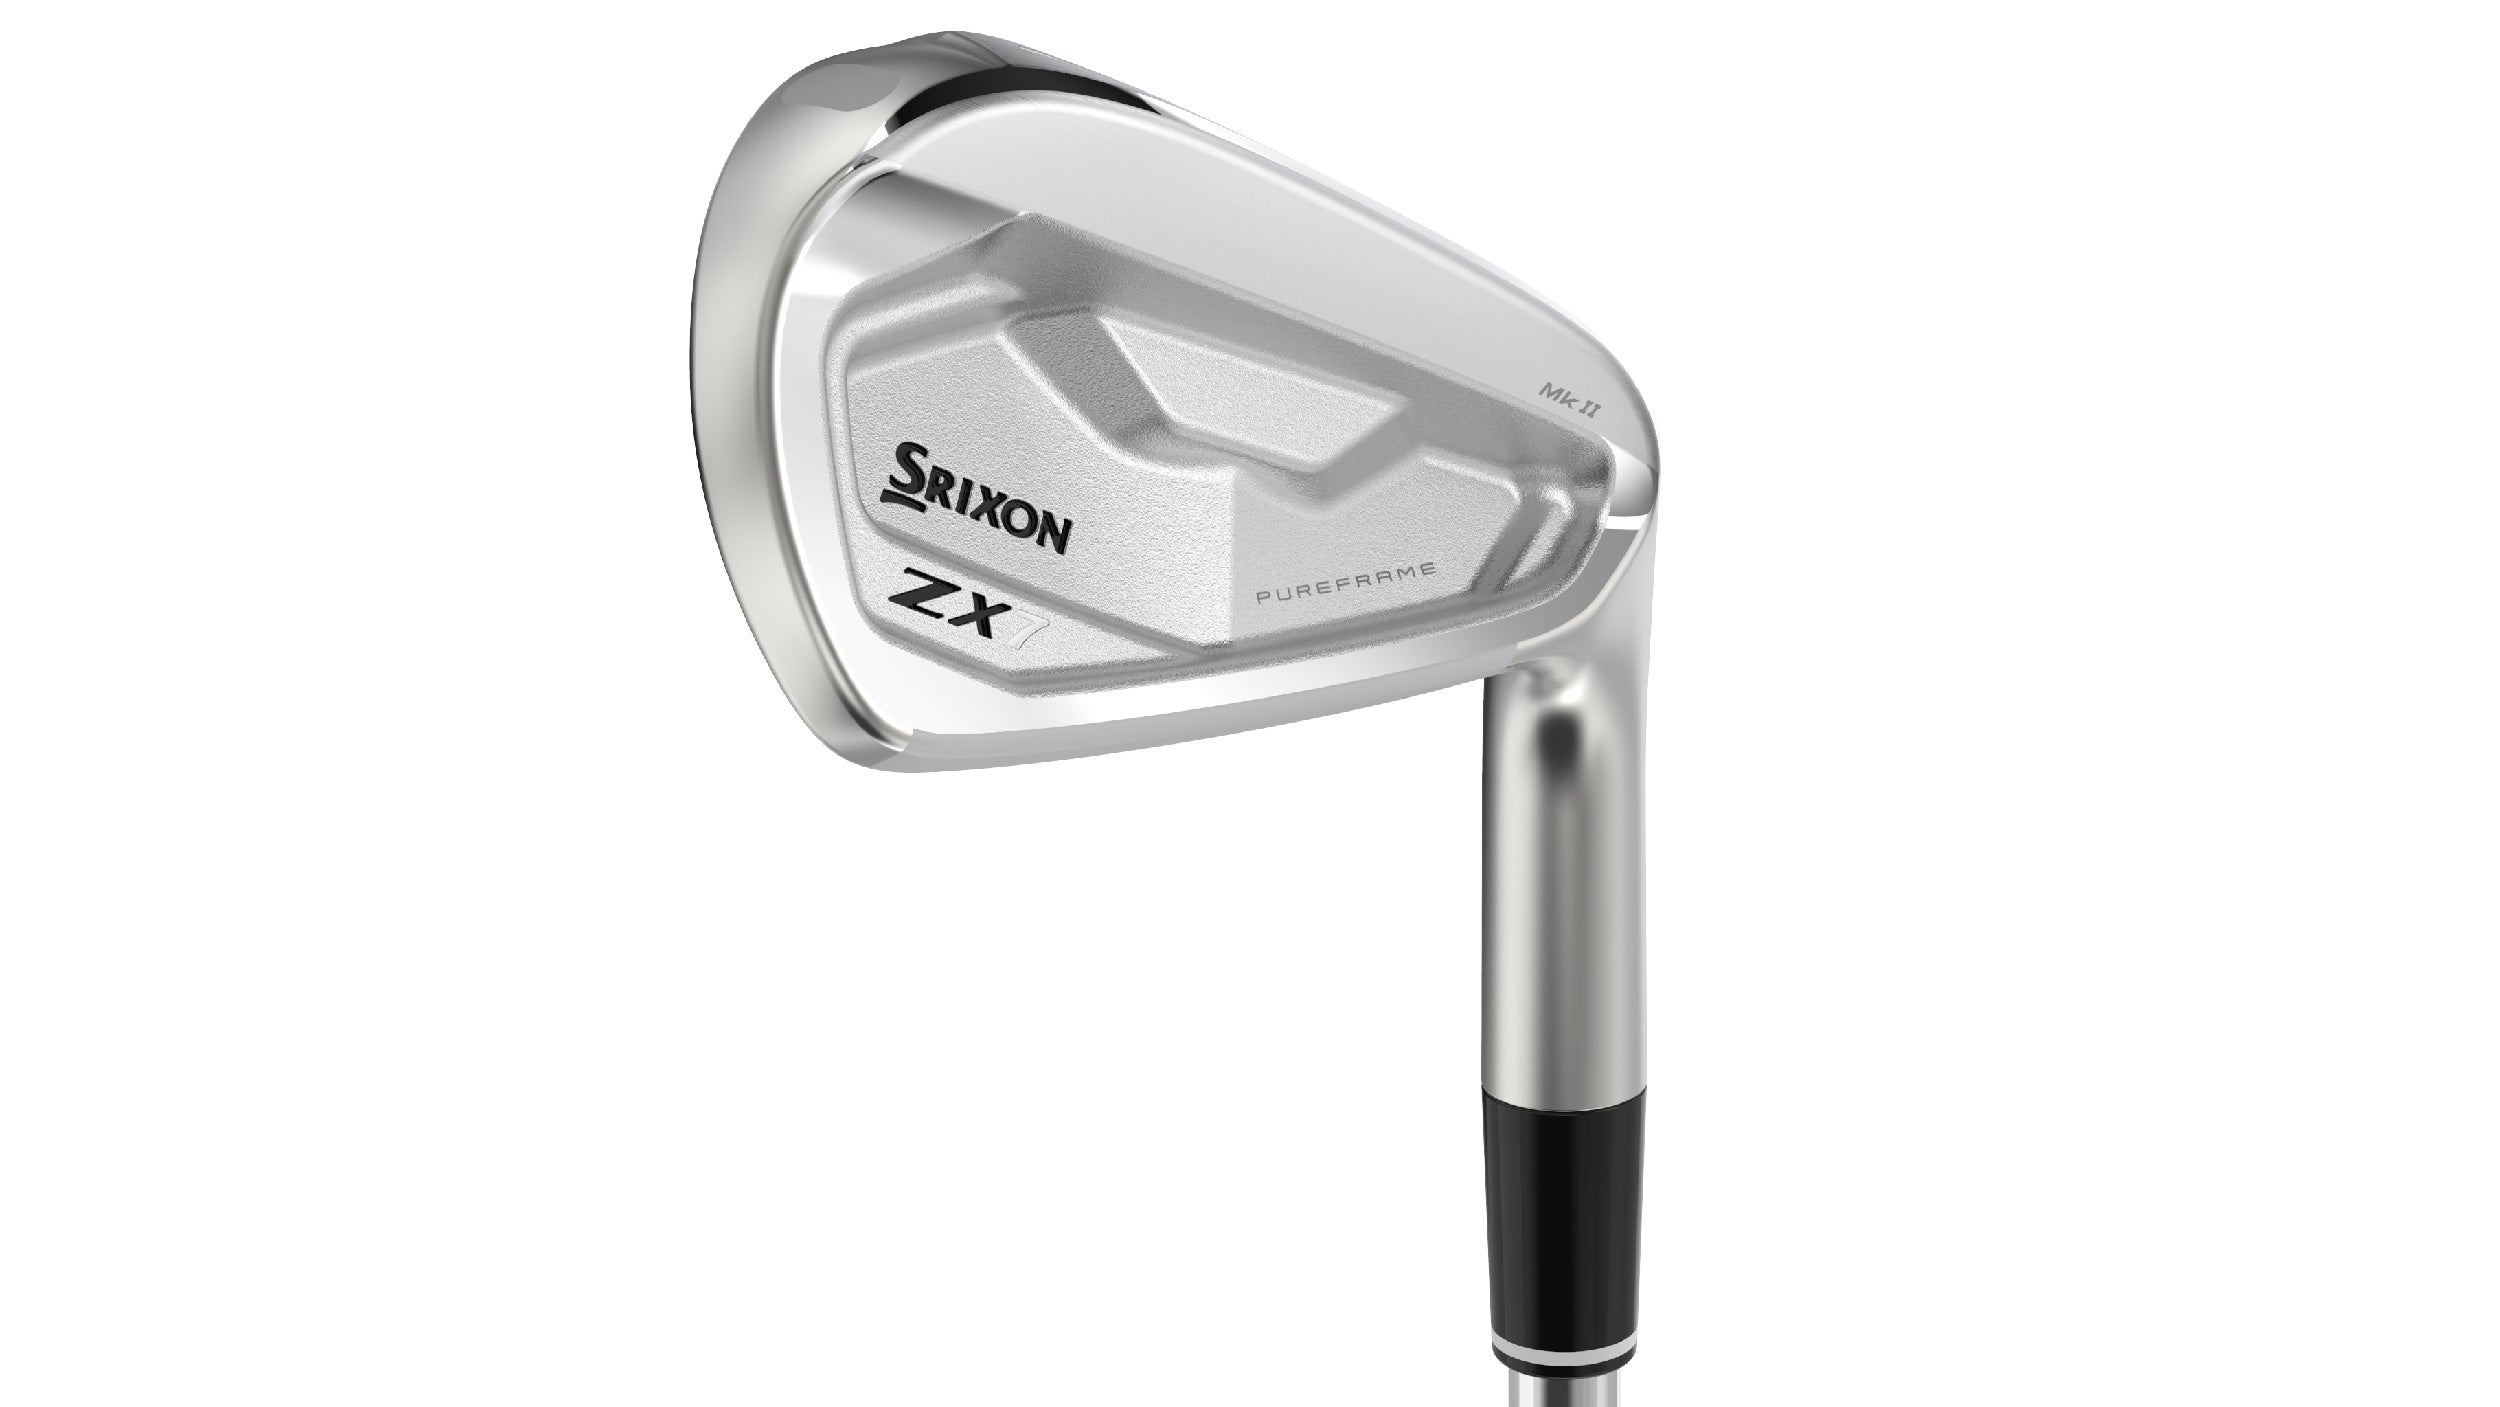 Srixon ZX MK II irons: Full reviews, robotic testing info and more